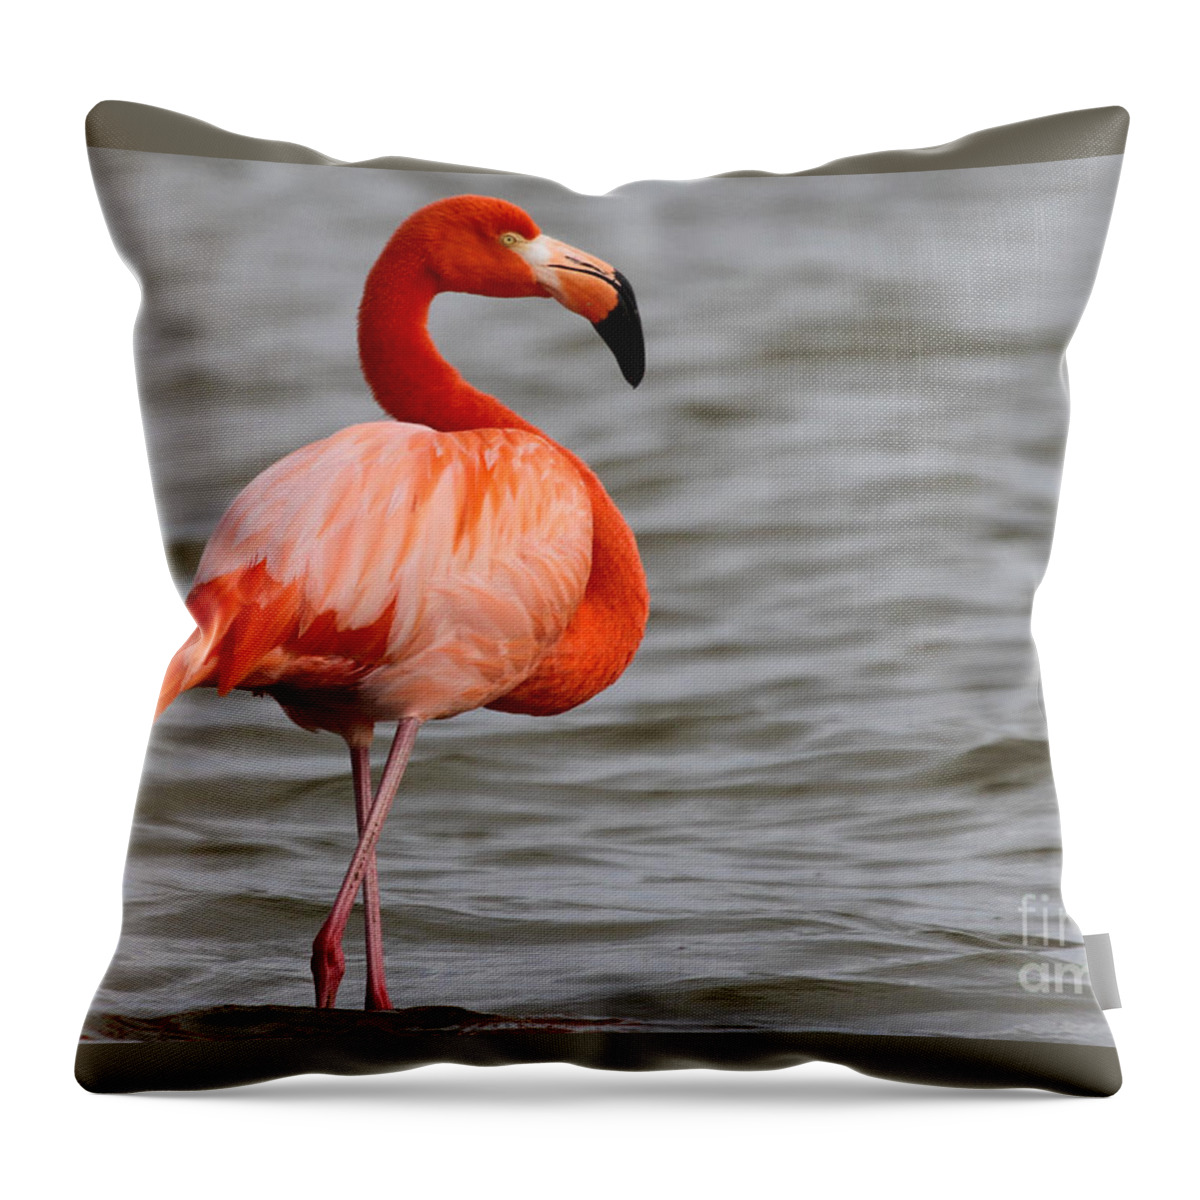 American Flamingo Throw Pillow featuring the photograph American Flamingo by Meg Rousher